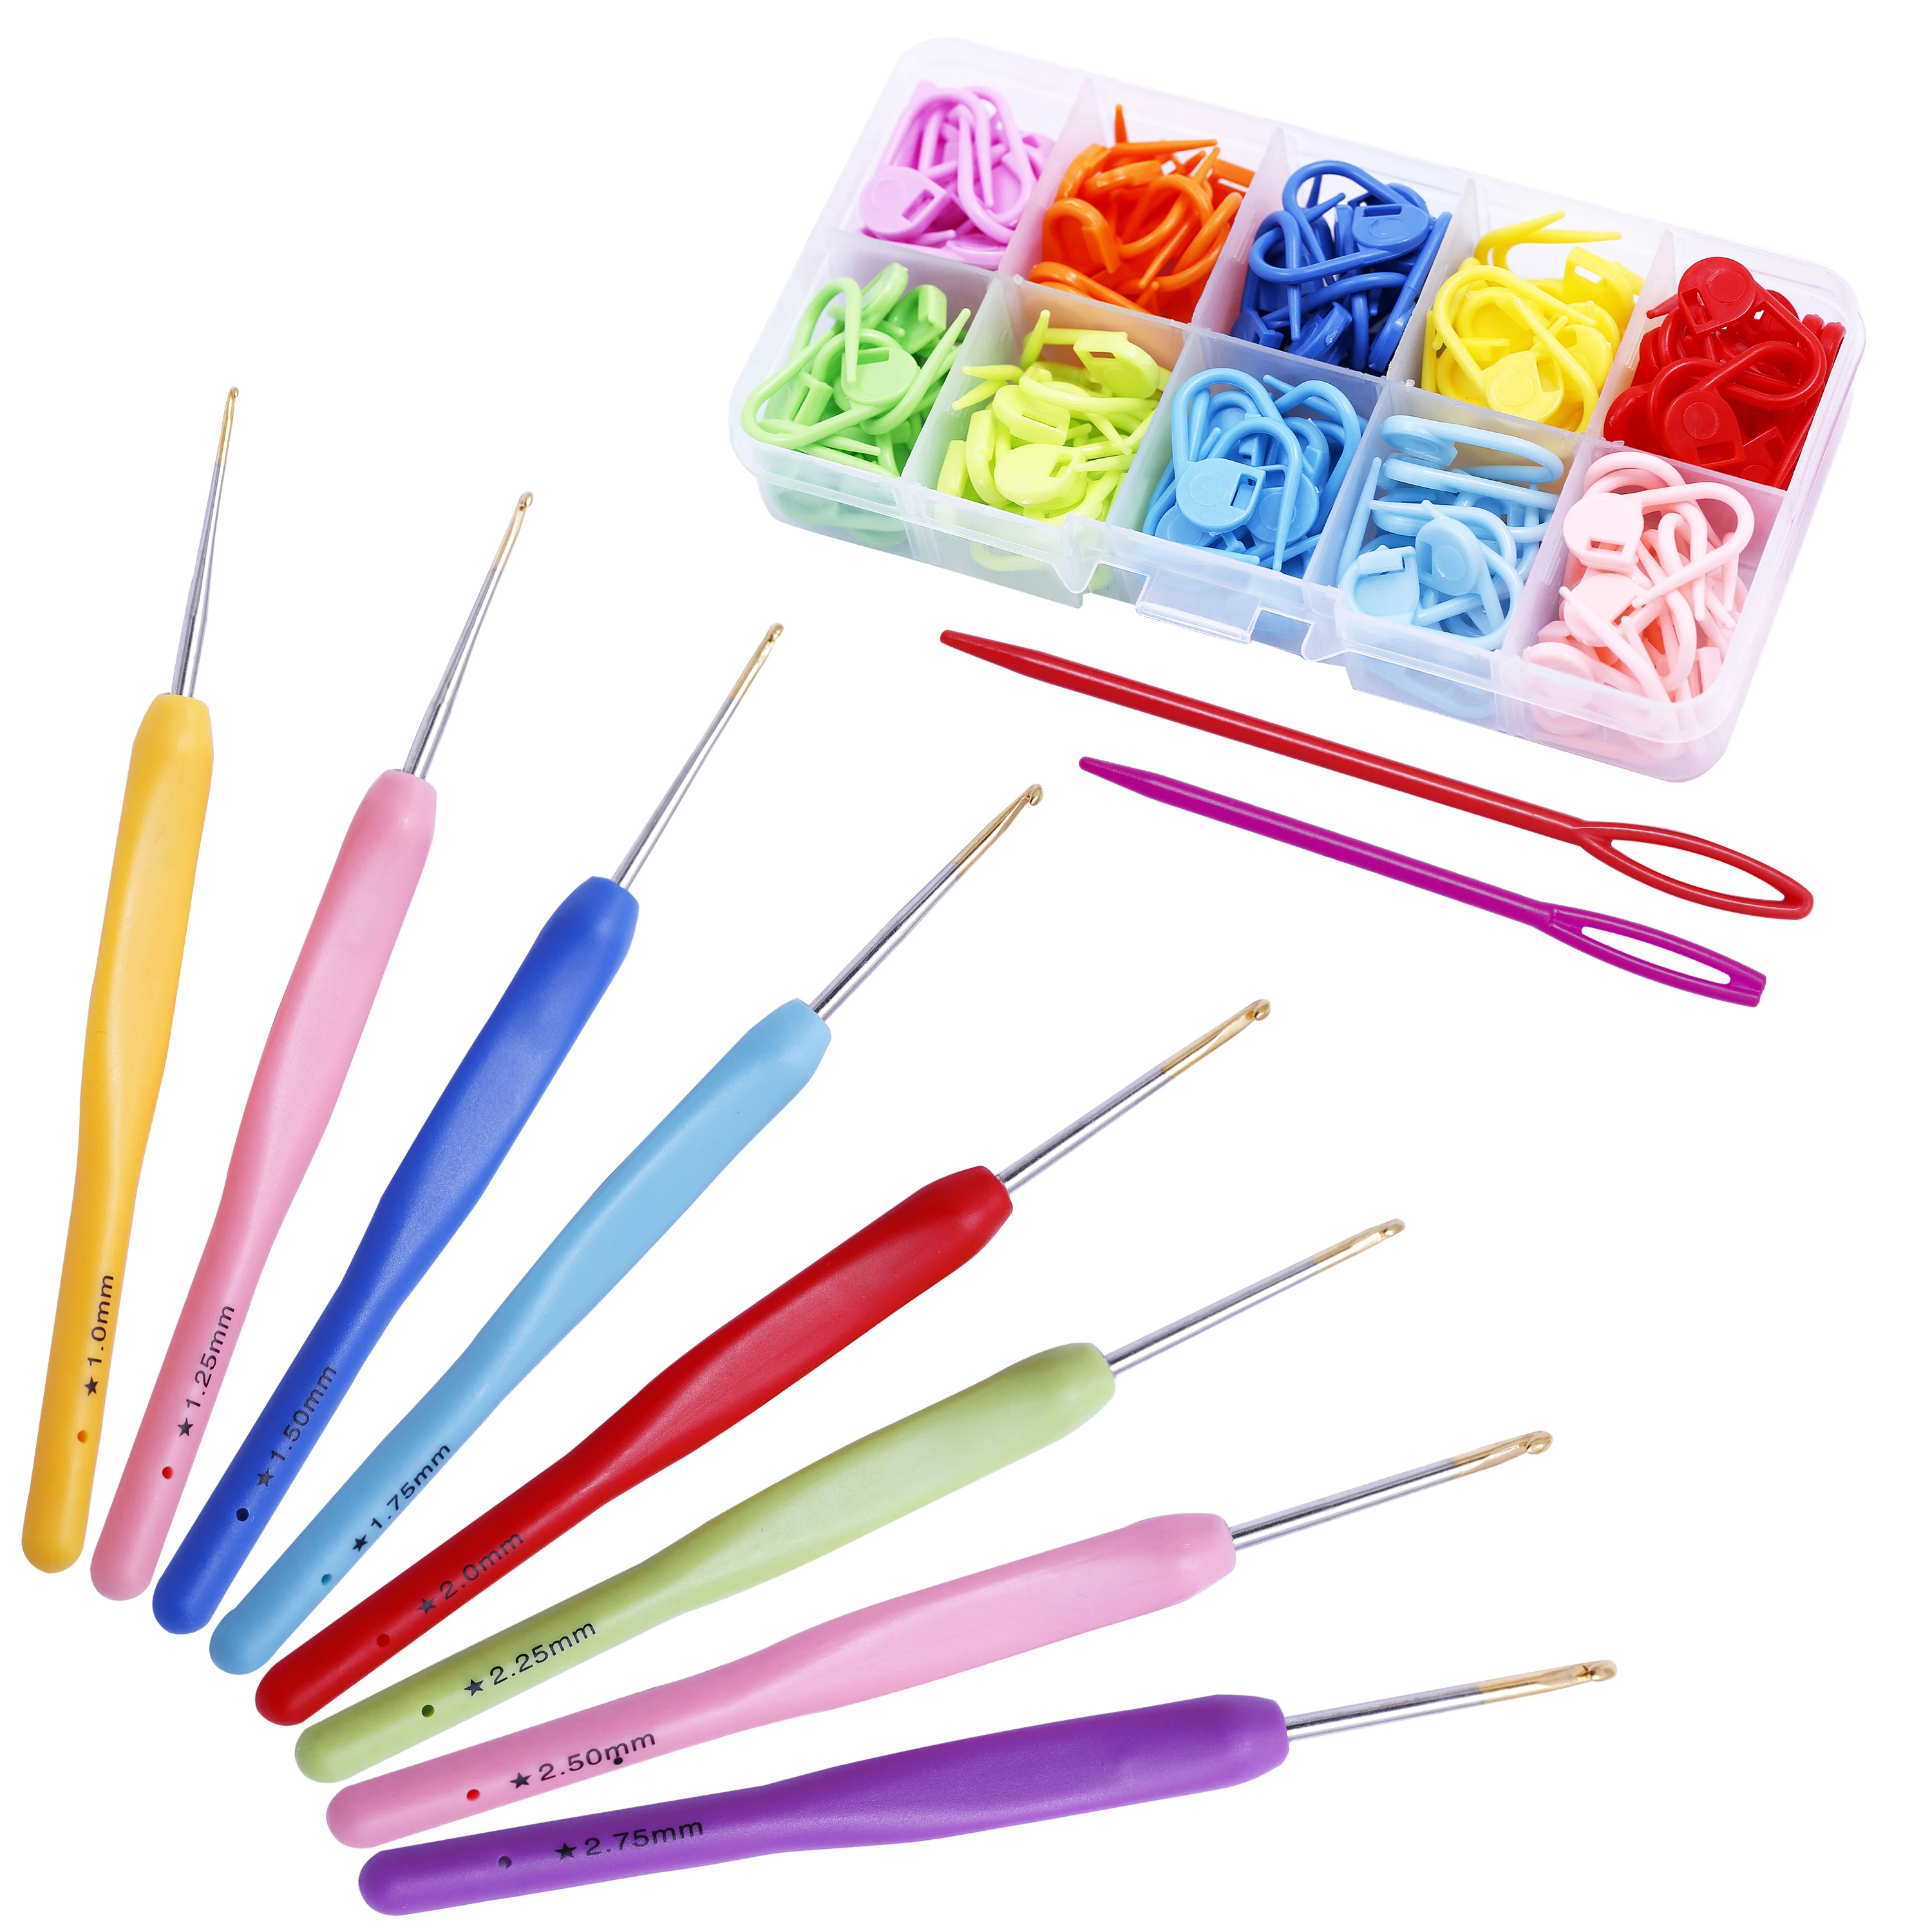 

MIUSIE 160 PCS Crochet Hooks and Locking Stitch Markers Plastic Handle Knitting Needle Set for Yarn Sweater Weave for Beginners